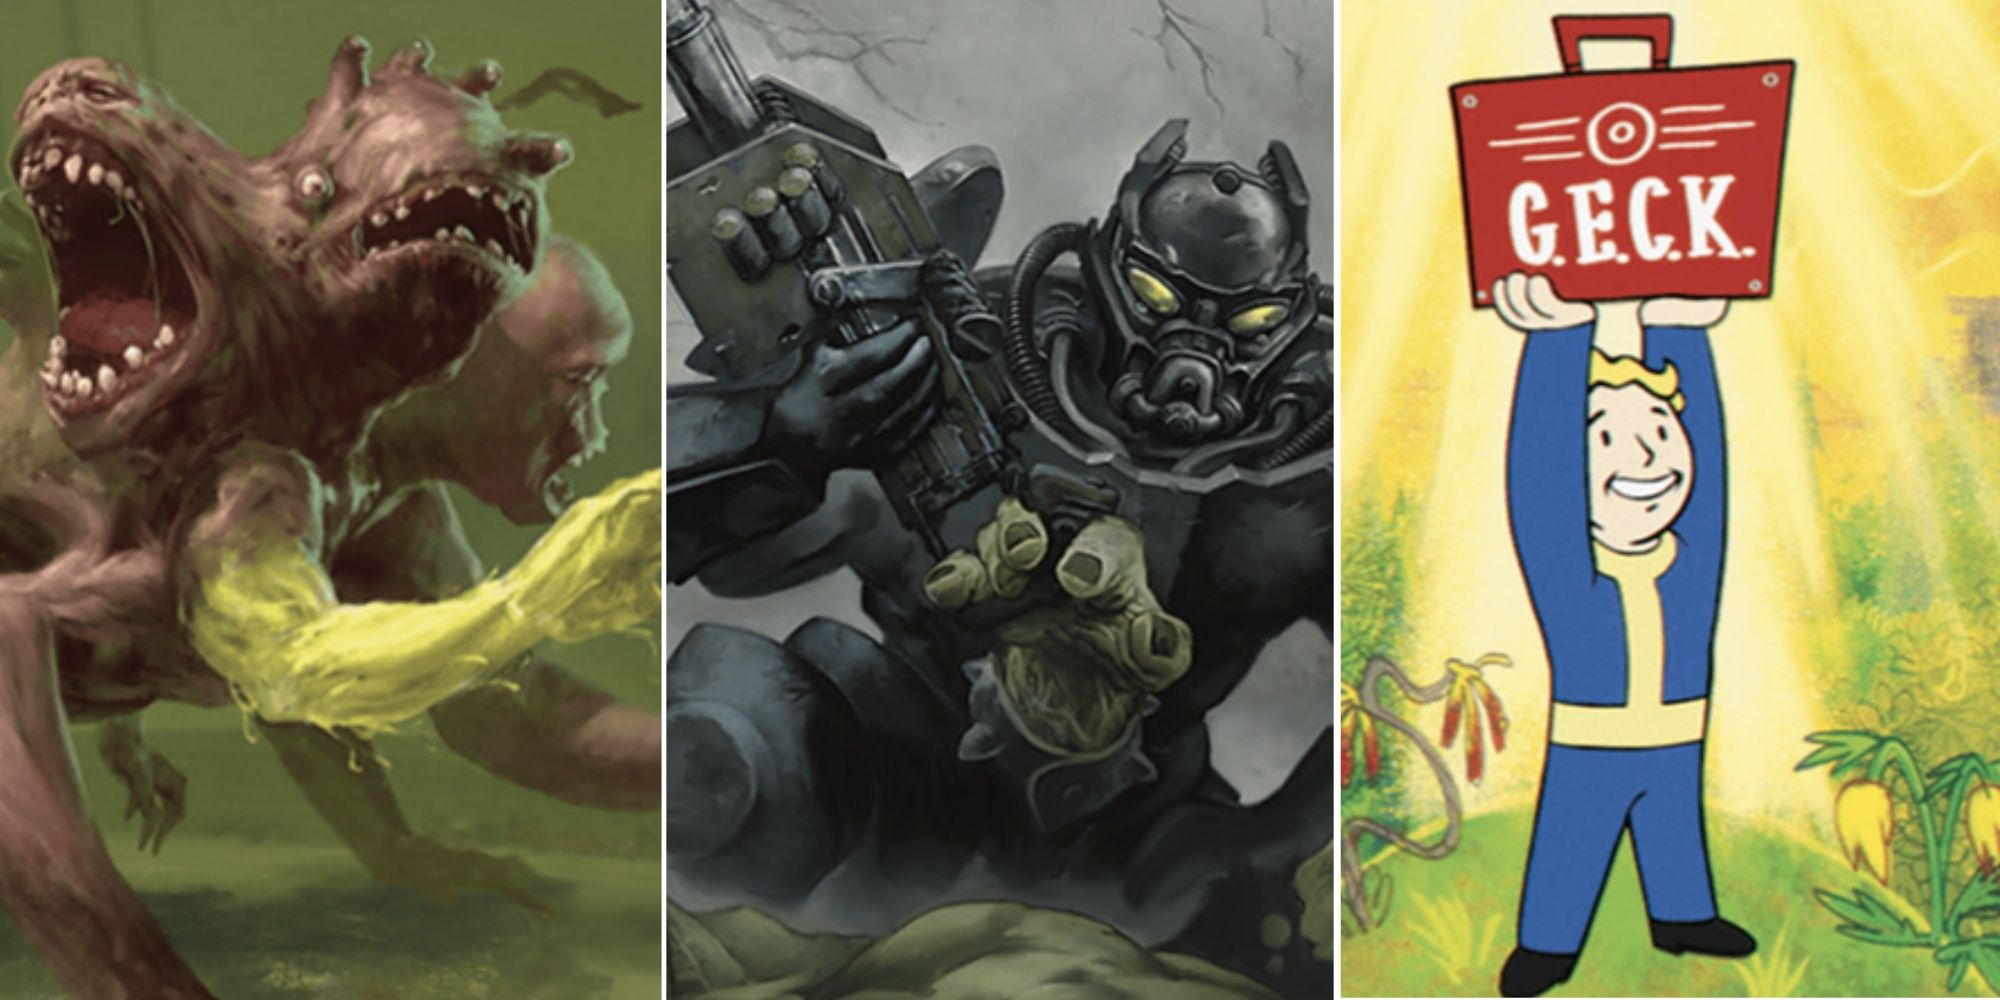 Branching Evolution, Pitiless Plunderer, and Crucible of Worlds Magic: The Gathering card art from Fallout.